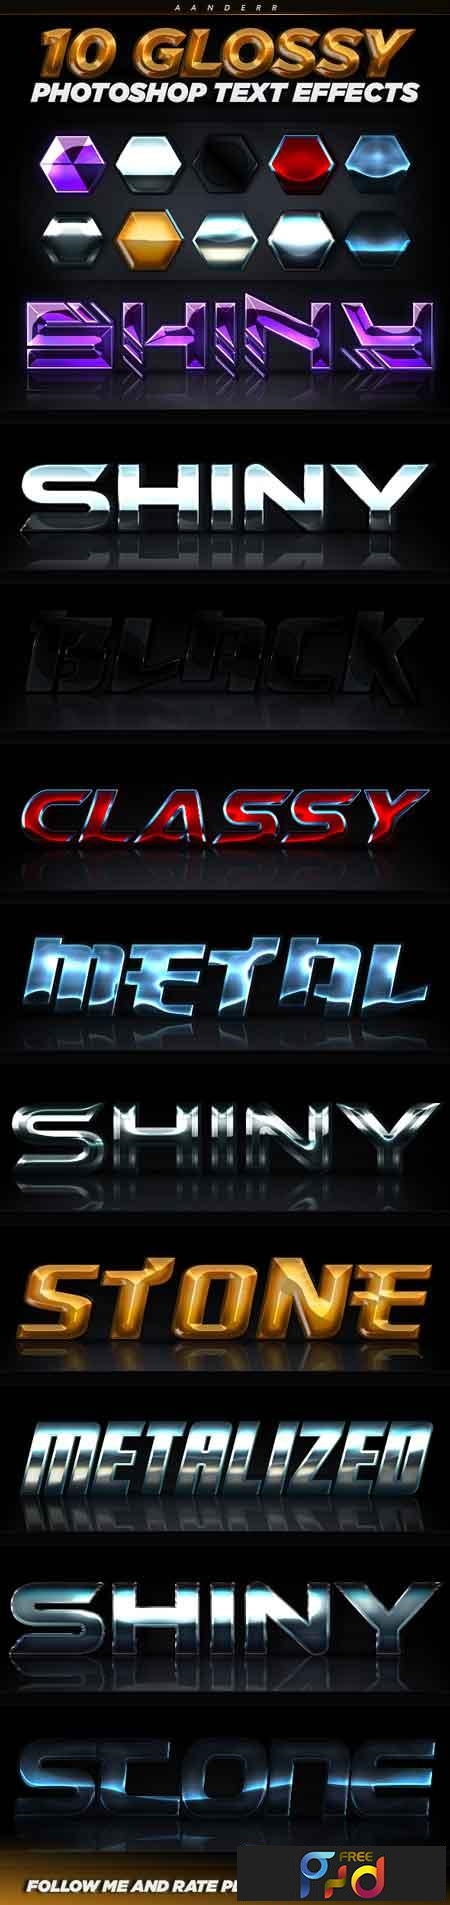 Glossy Photoshop Text Effects